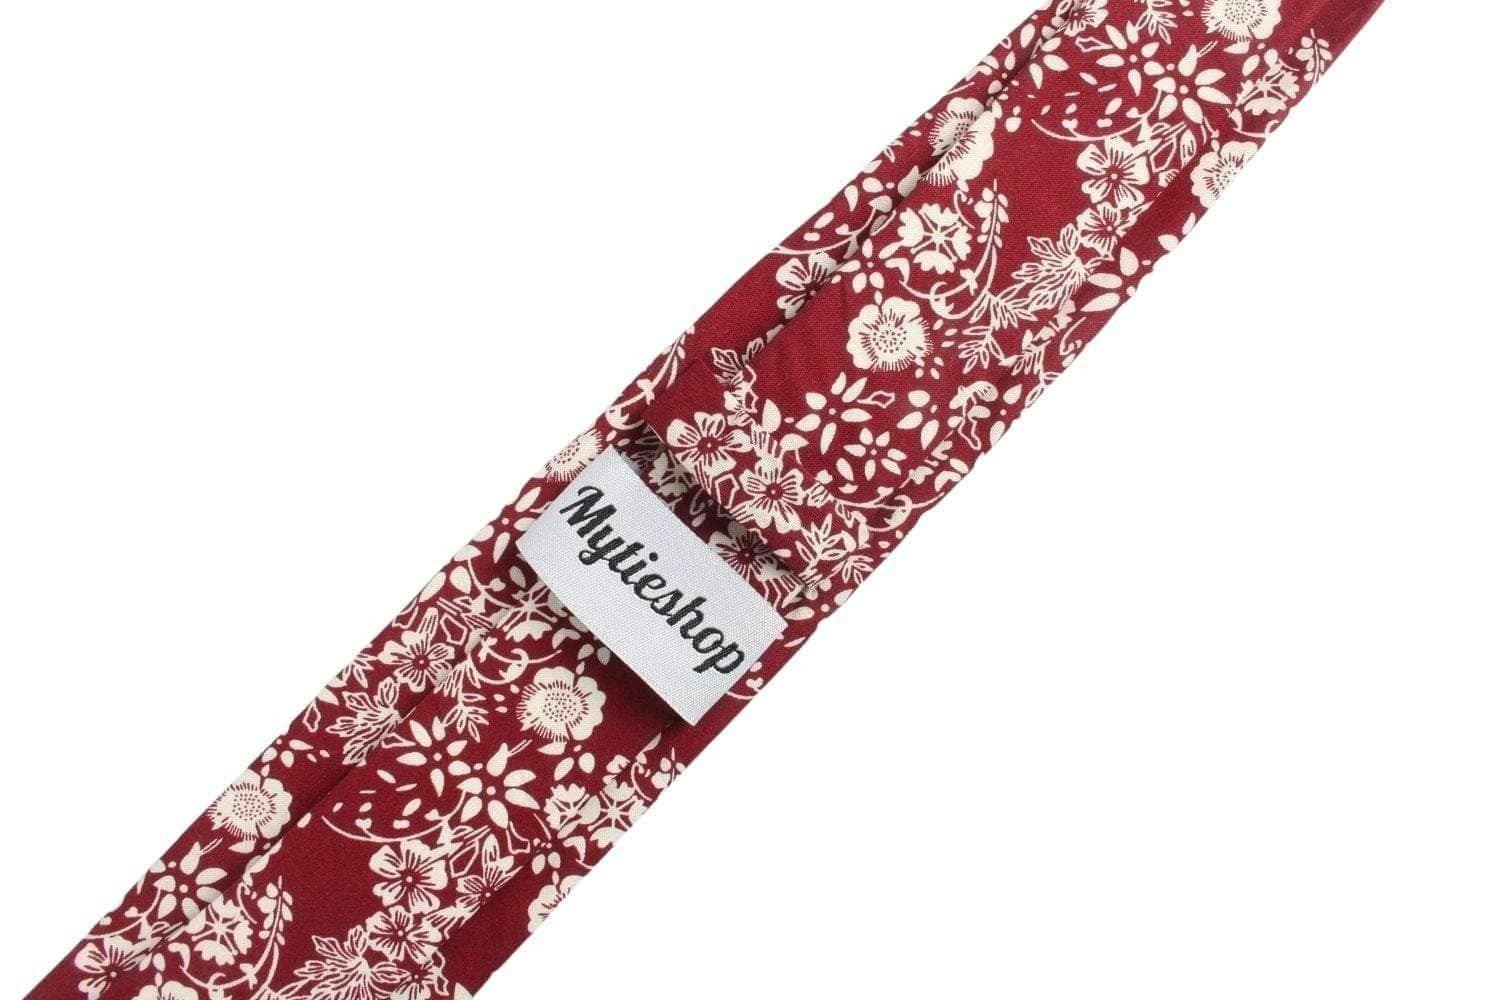 Burgundy Floral Tie 2.36&quot; ELI - MYTIESHOP-Neckties-Burgundy Floral Tie Men’s Floral Necktie for weddings and events, great for prom and anniversary gifts. Mens floral ties near me us ties tie shops-Mytieshop. Skinny ties for weddings anniversaries. Father of bride. Groomsmen. Cool skinny neckties for men. Neckwear for prom, missions and fancy events. Gift ideas for men. Anniversaries ideas. Wedding aesthetics. Flower ties. Dry flower ties.